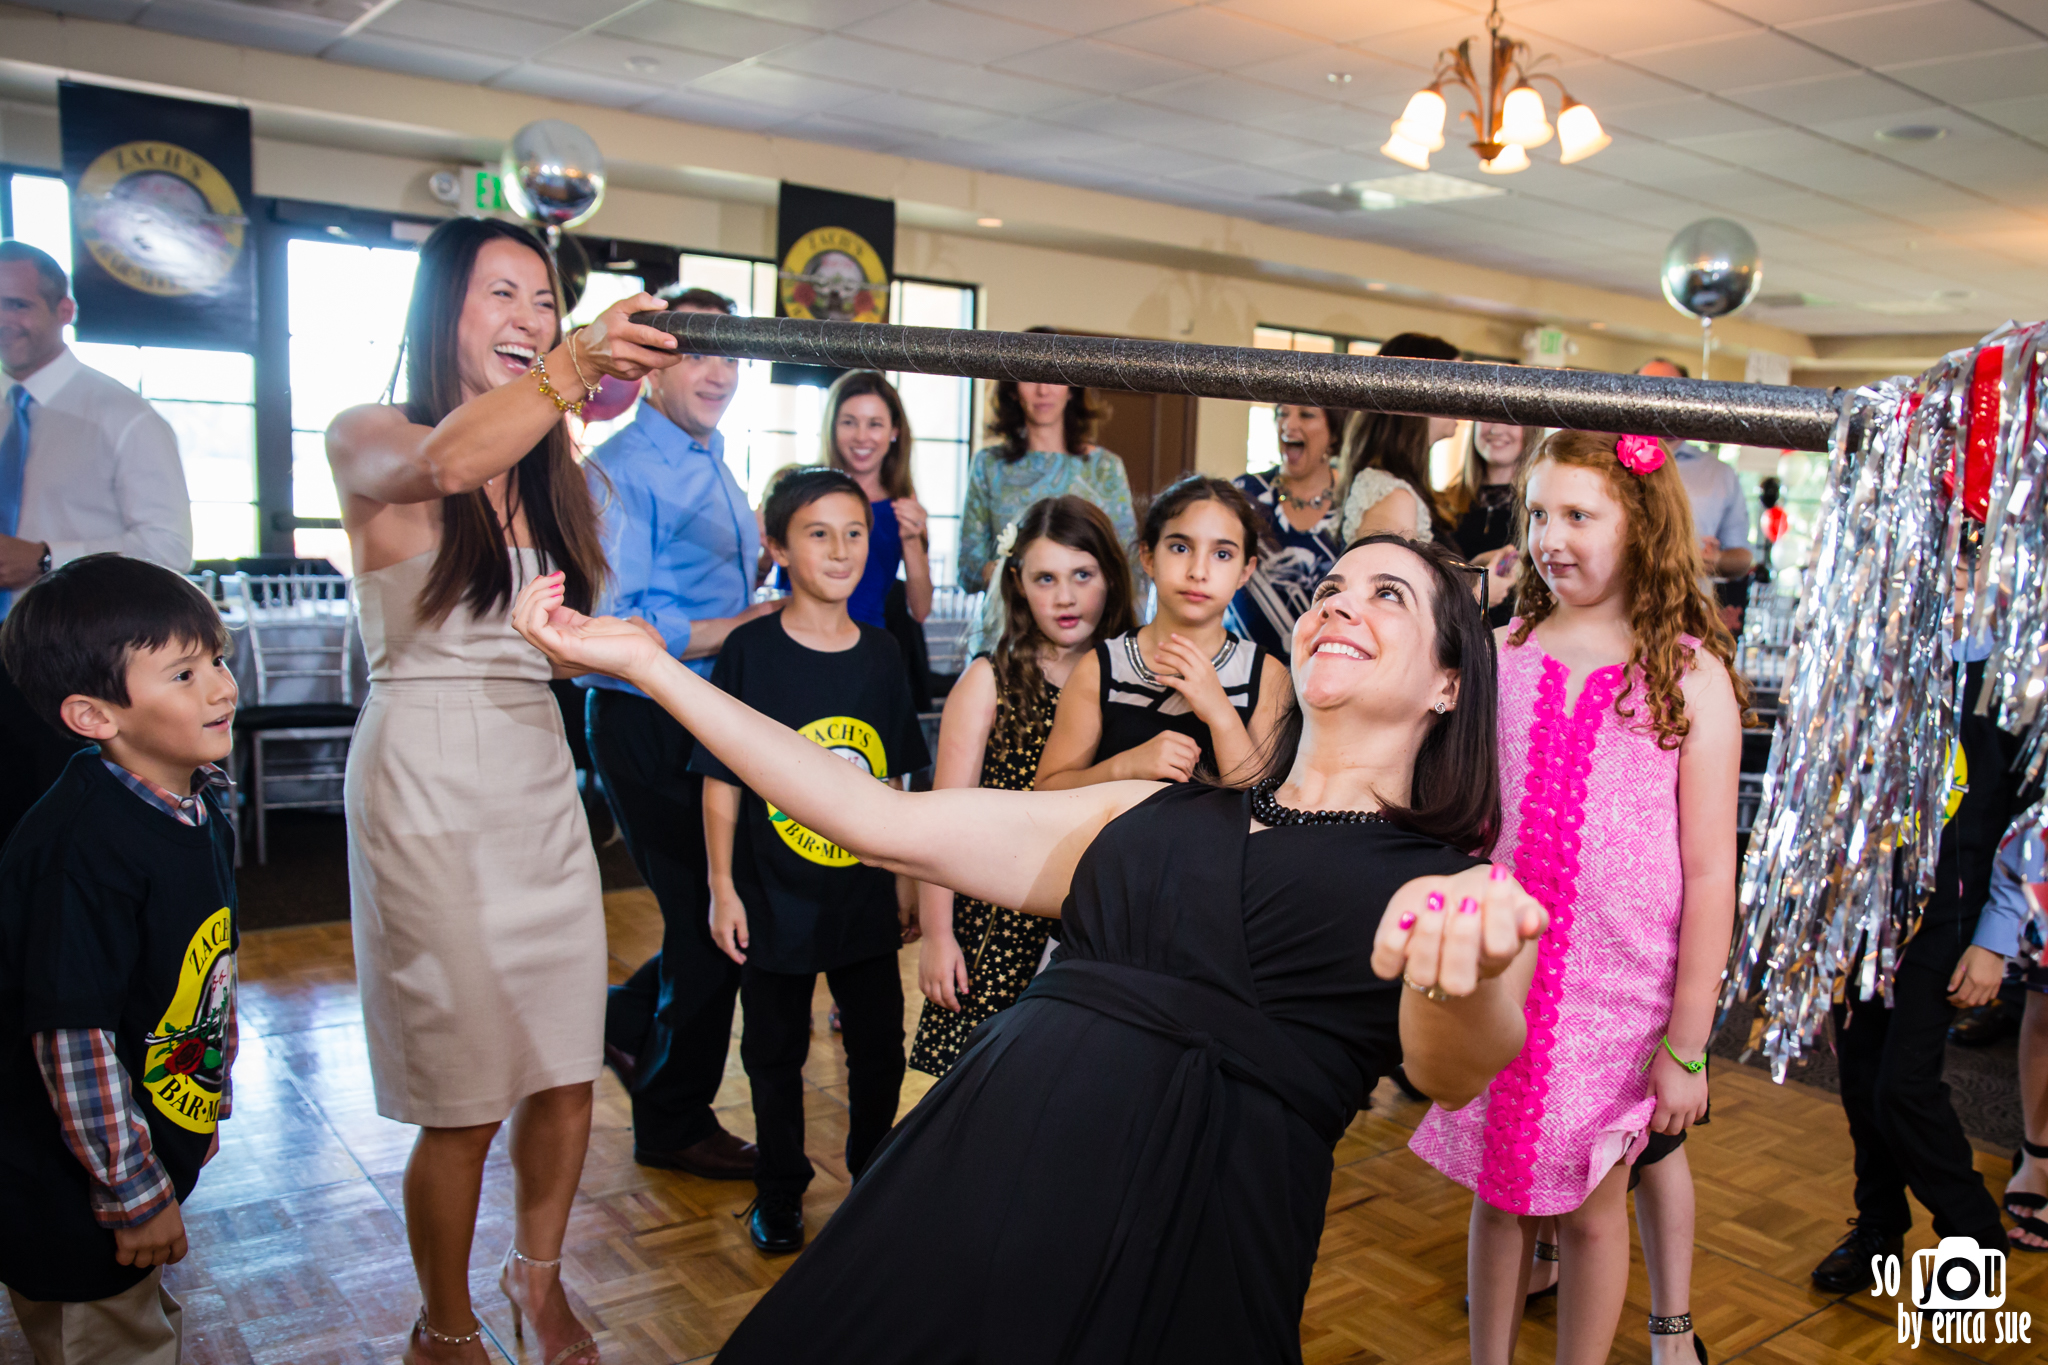 bar-mitzvah-pembroke-lakes-golf-country-club-mitzvah-photography-so-you-by-erica-sue-45.jpg